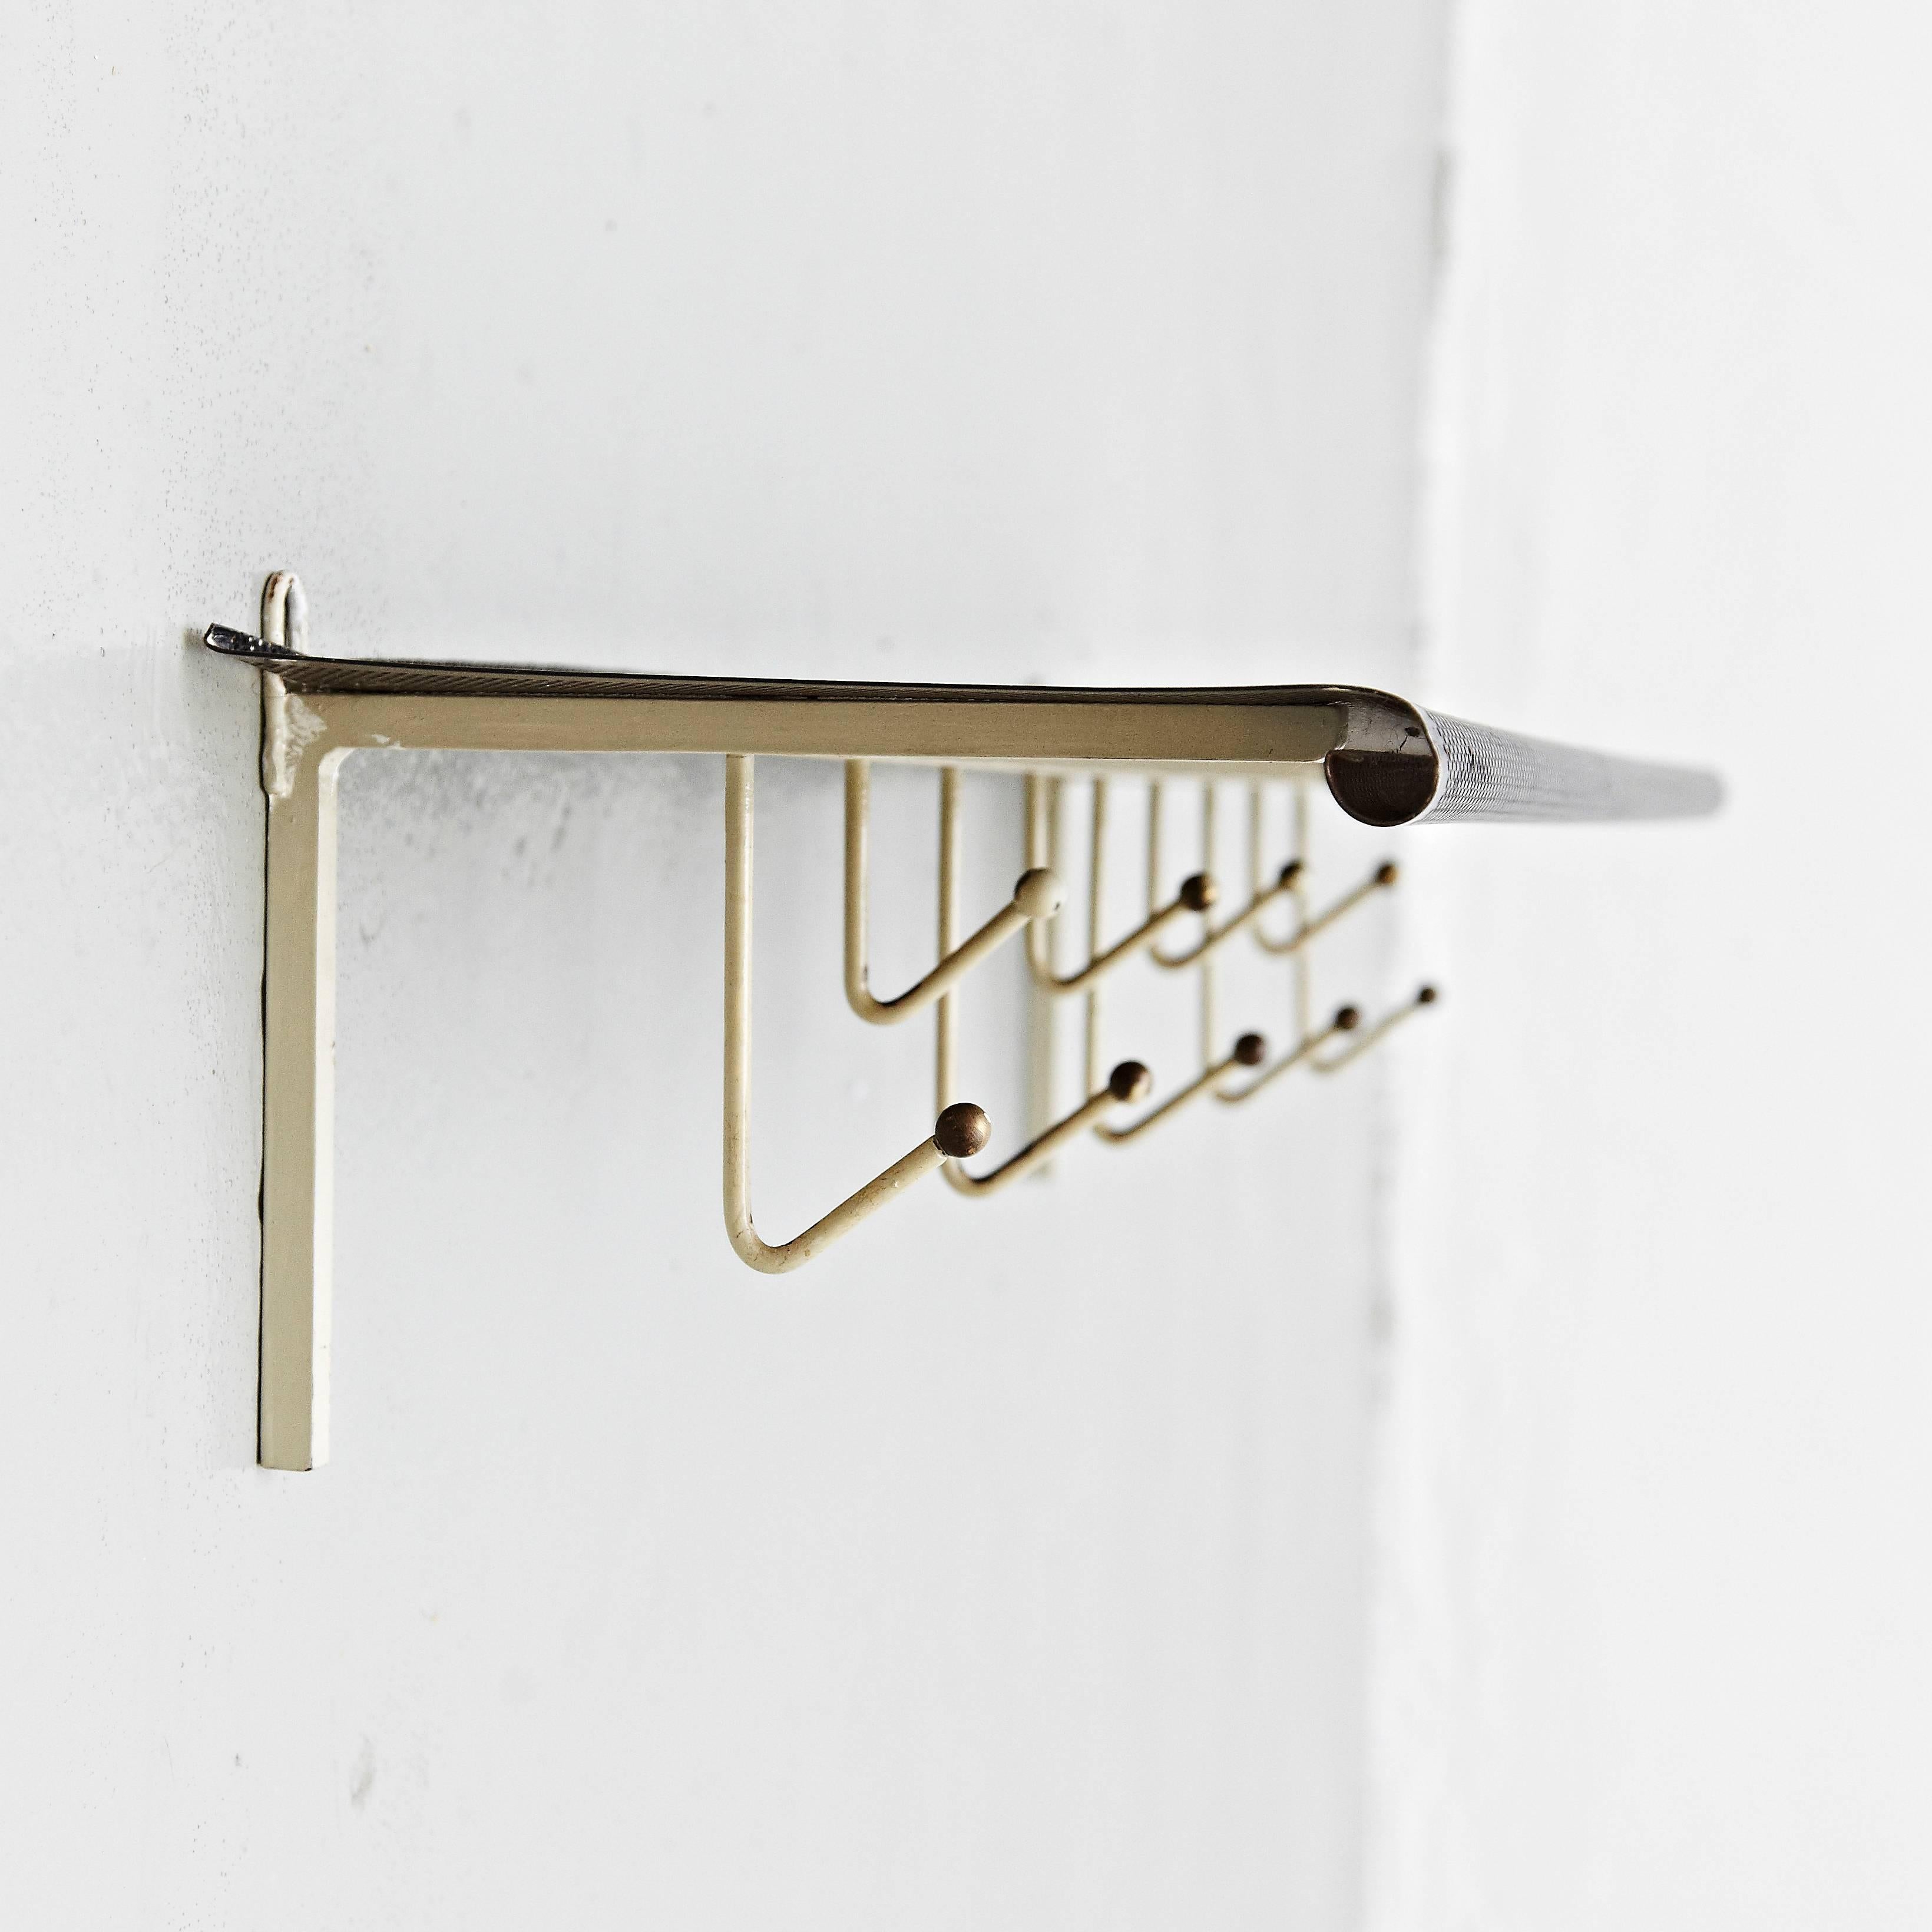 Coat rack designed by Mathieu Matégot
Manufactured by Artimeta (Netherland), circa 1940.
Perforated, lacquered metal.

In good original condition, with minor wear consistent with age and use, preserving a beautiful patina.

Mathieu Matégot